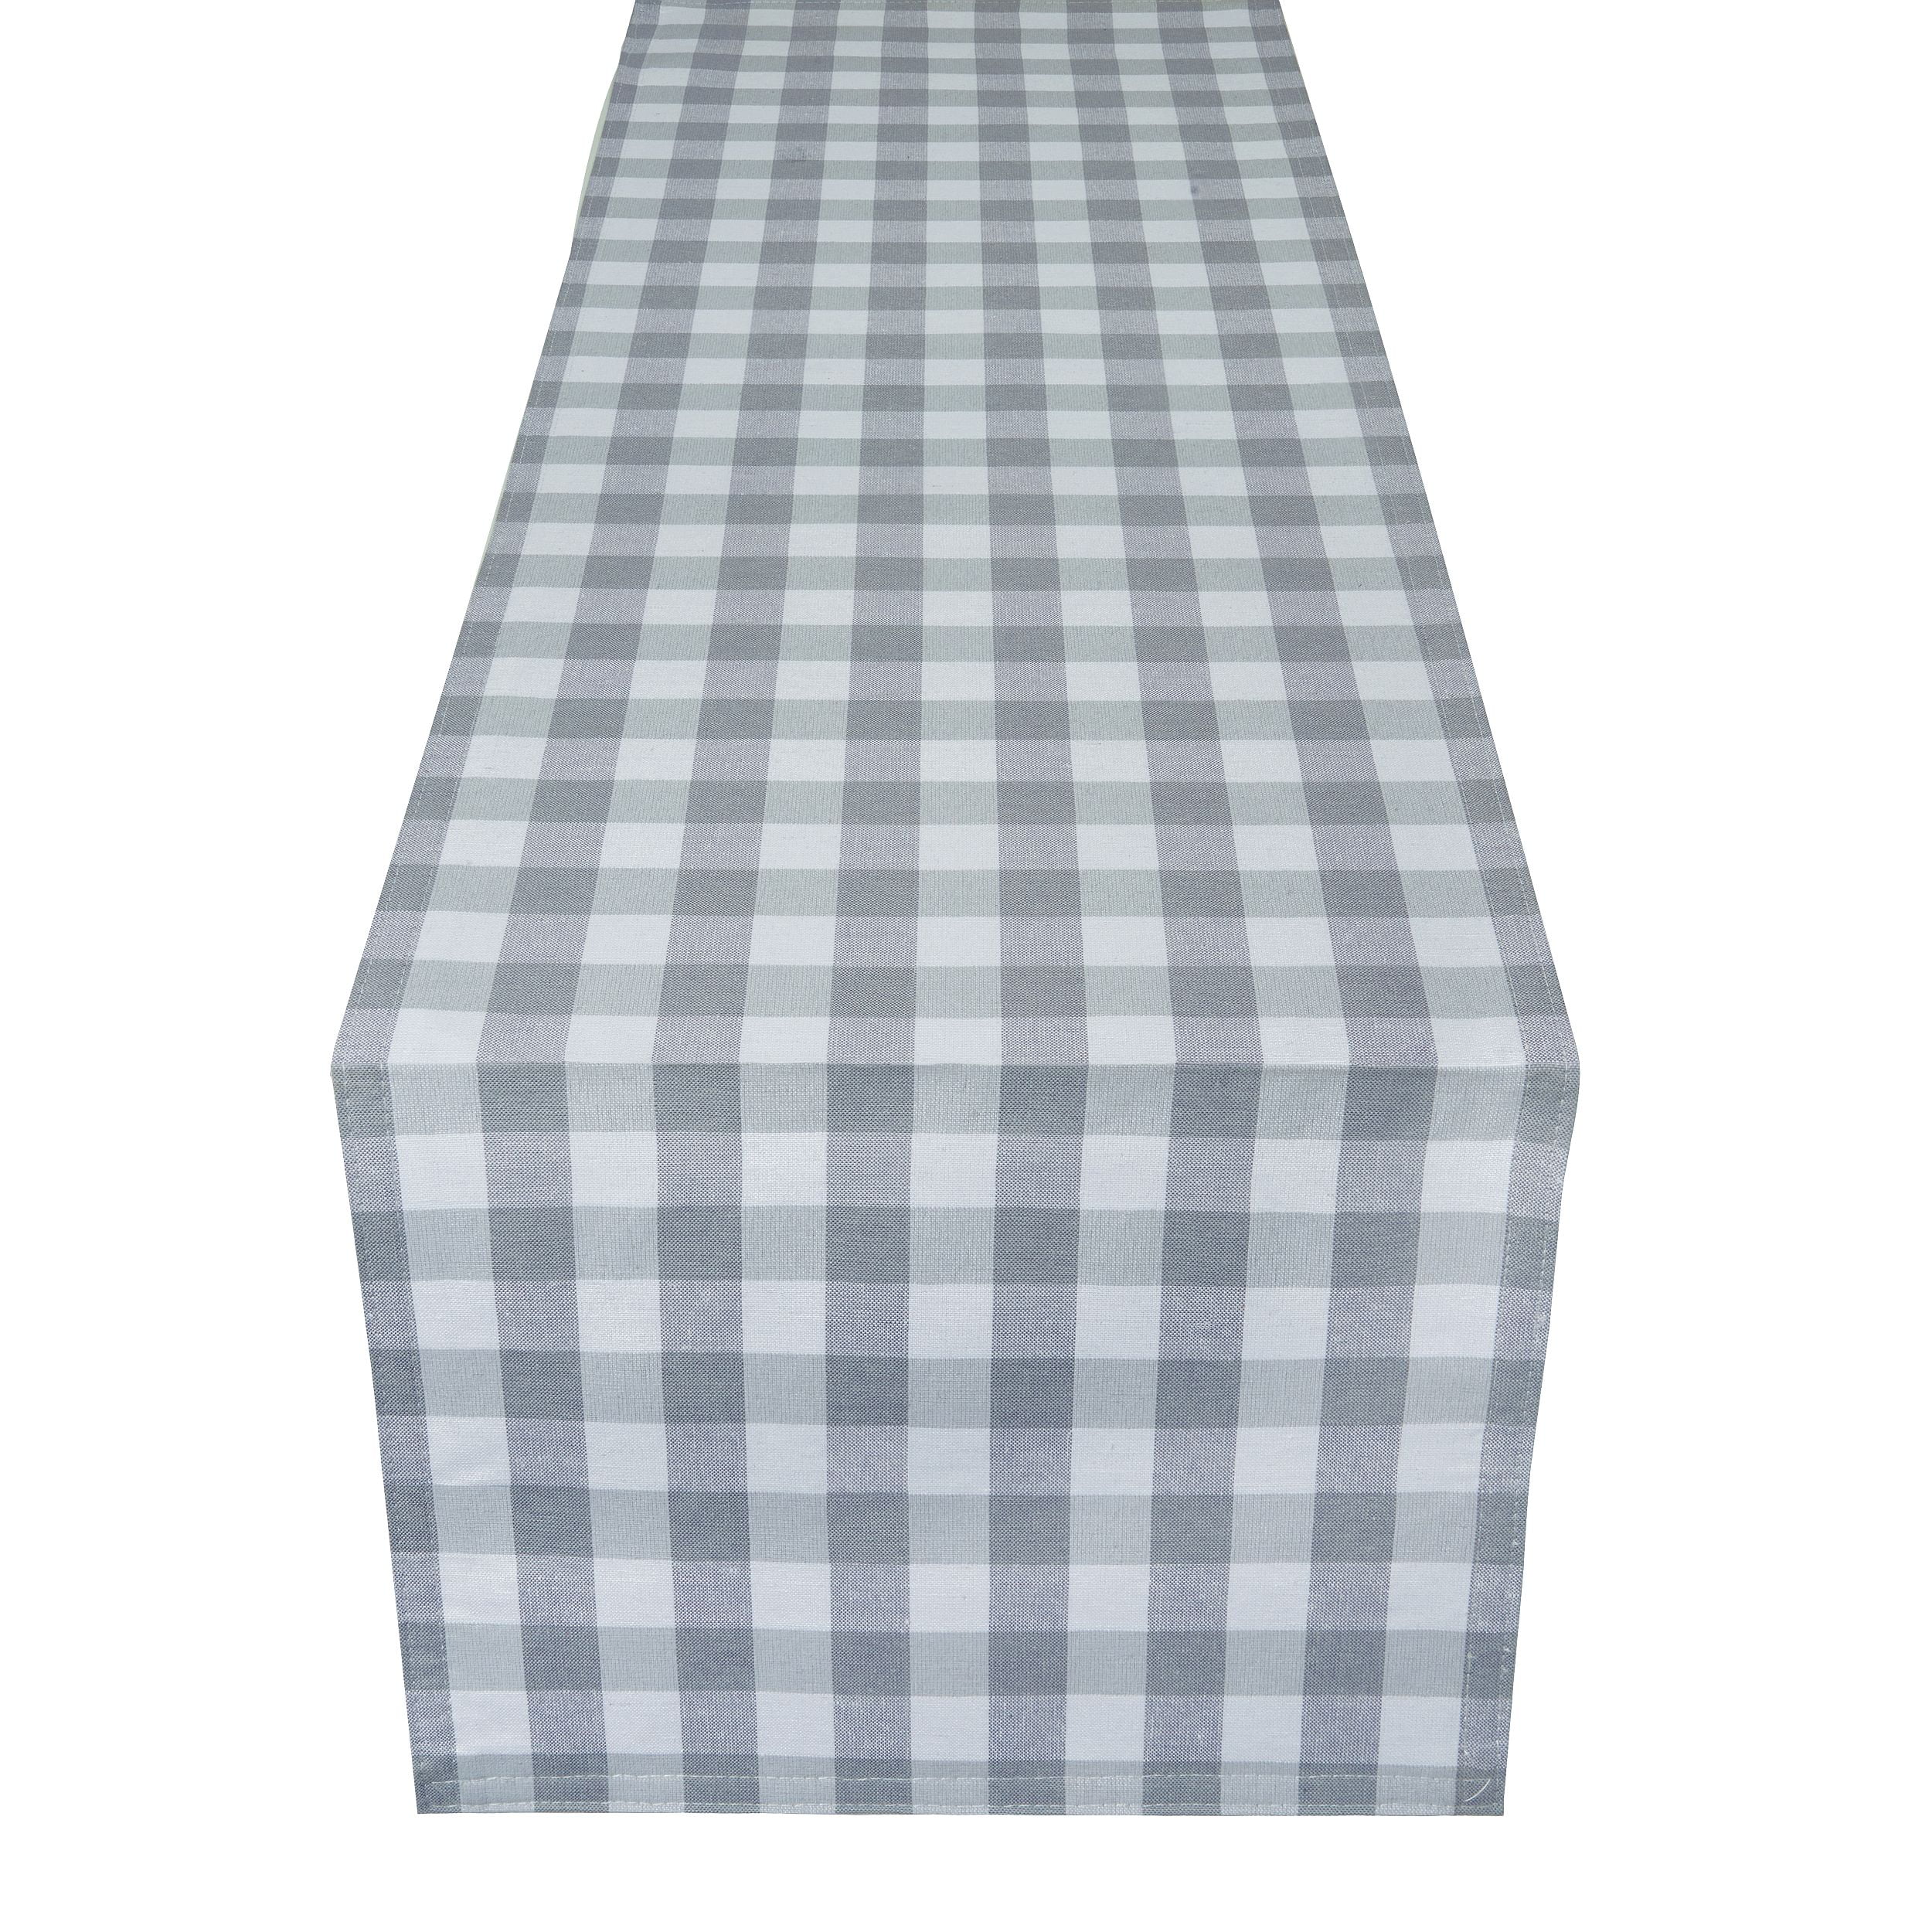 Choice of 2 Sizes Gray & White Gingham Check Rib Weave Cotton Table Runner 